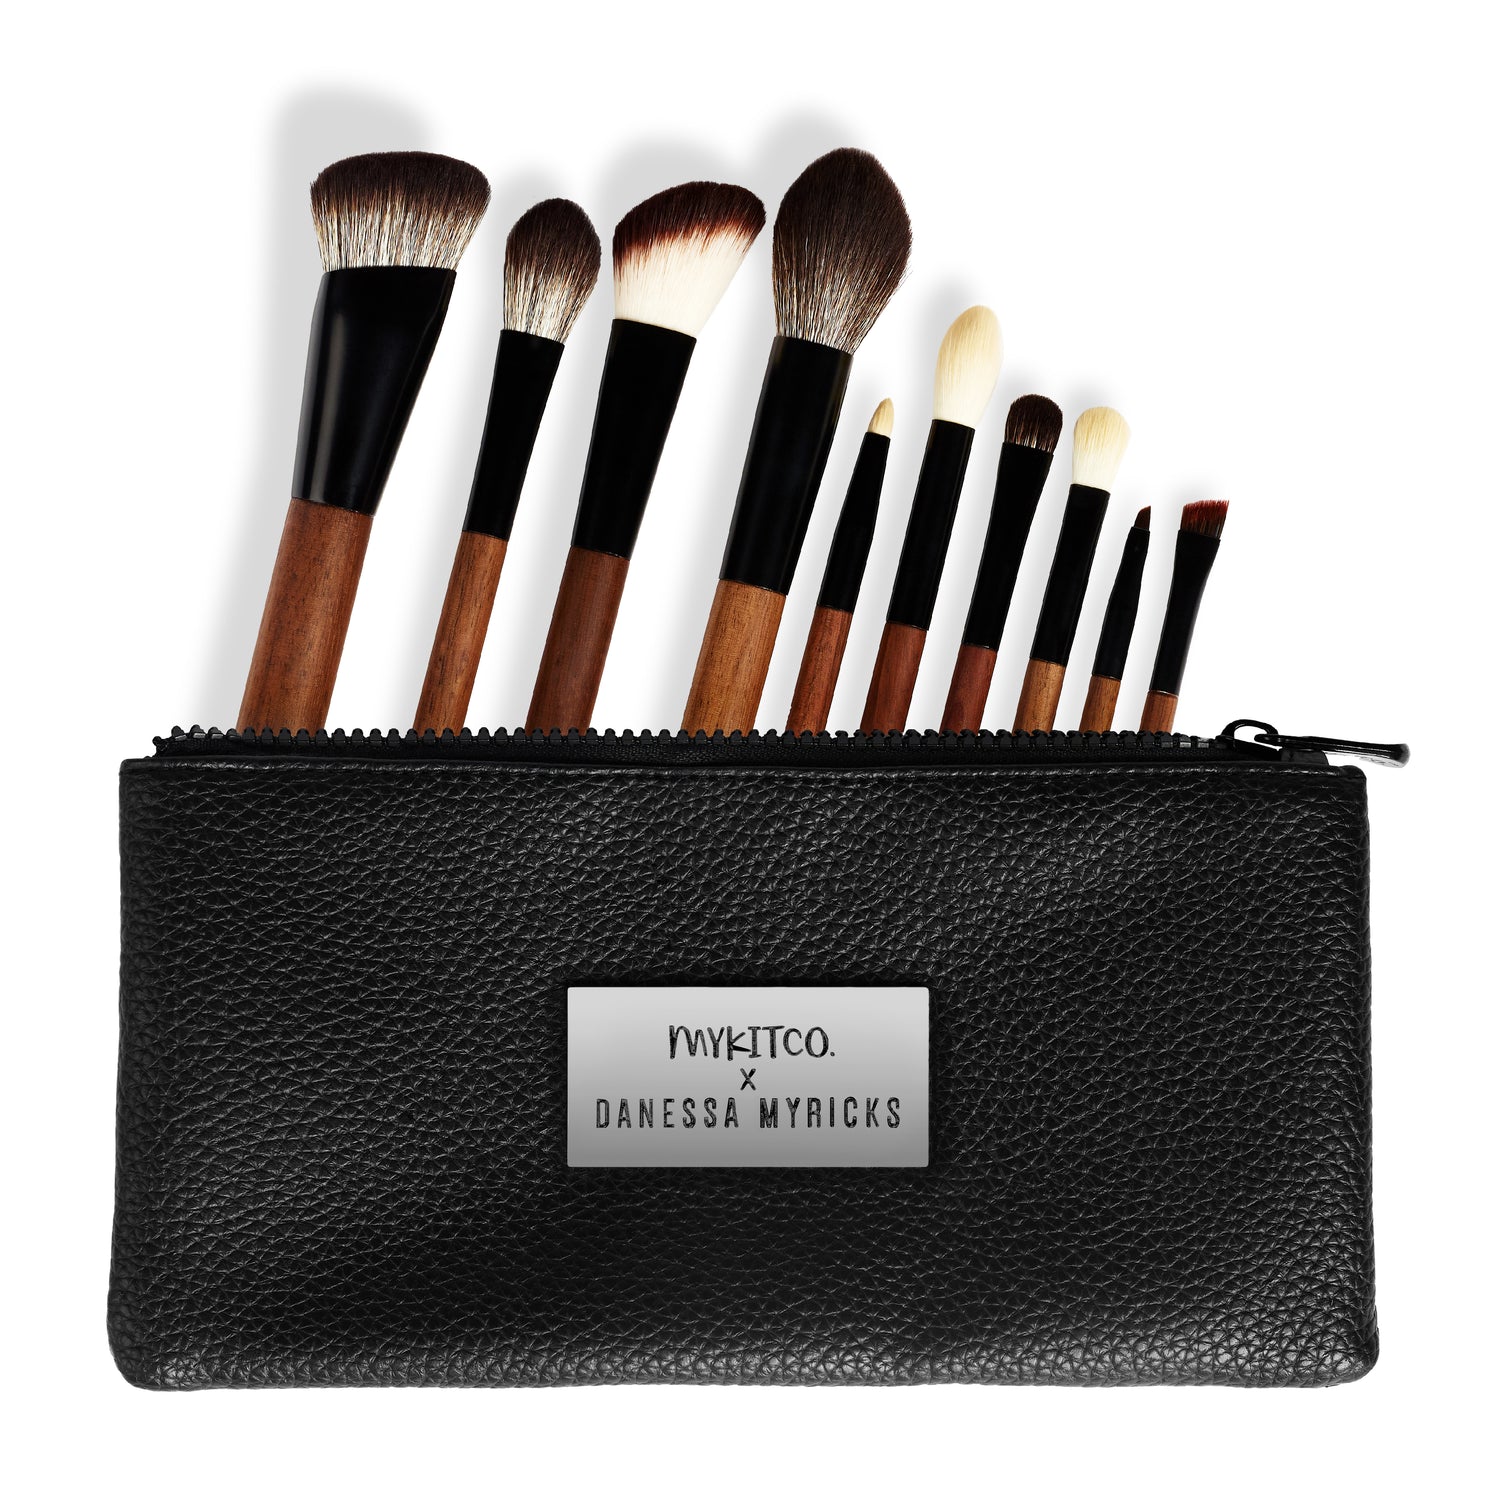 My Yummy Brush Collection: Starter Edition